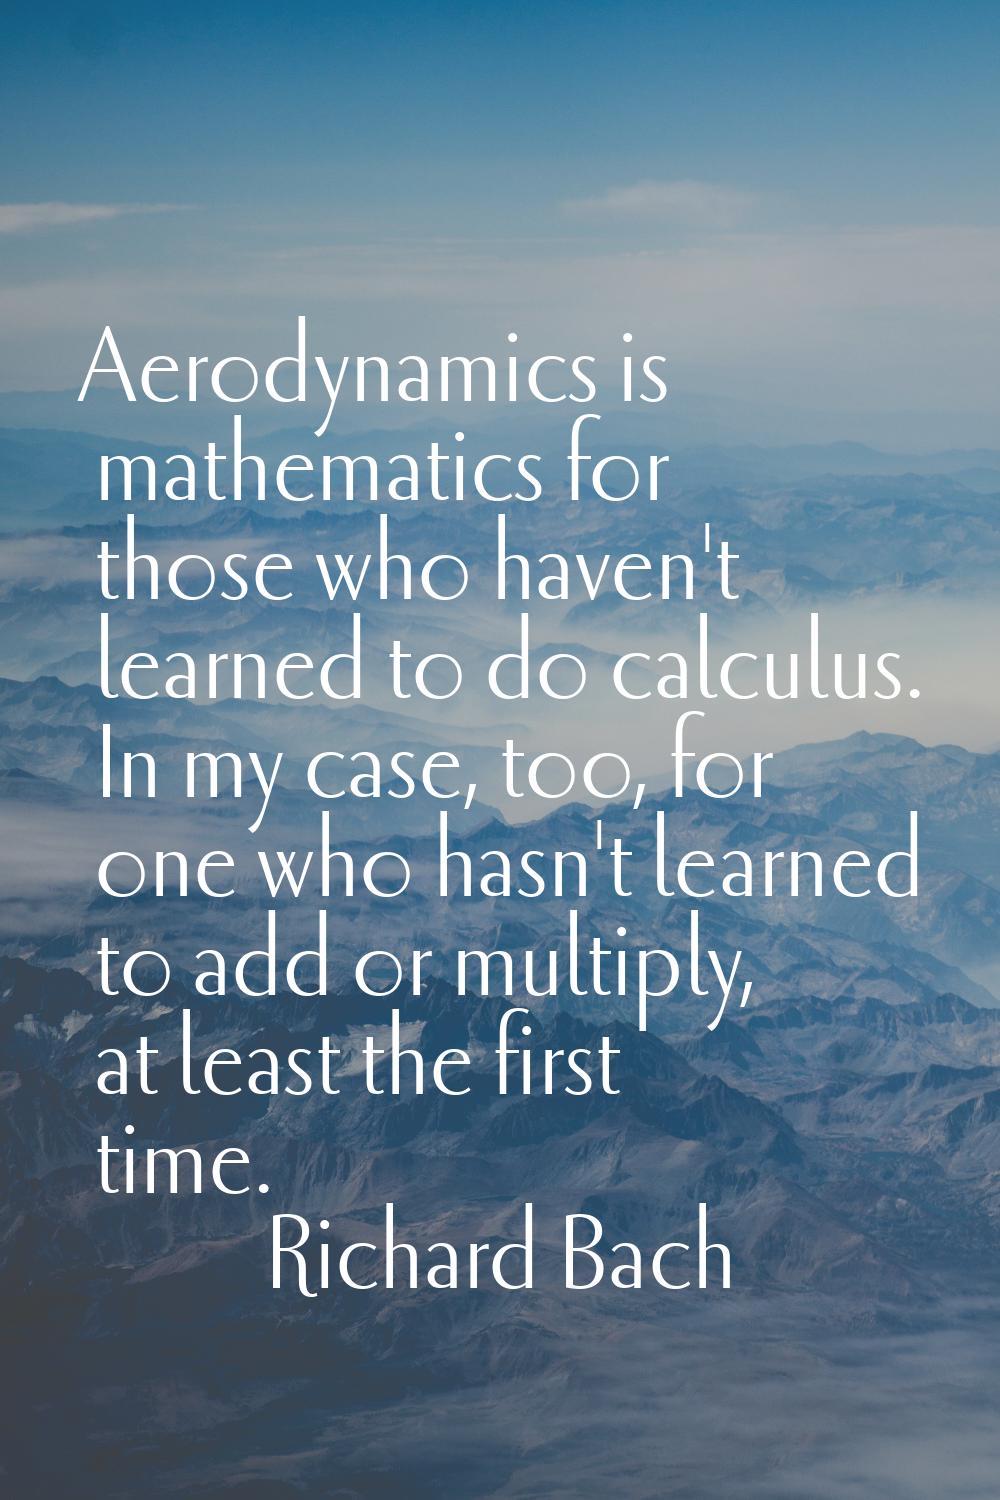 Aerodynamics is mathematics for those who haven't learned to do calculus. In my case, too, for one 